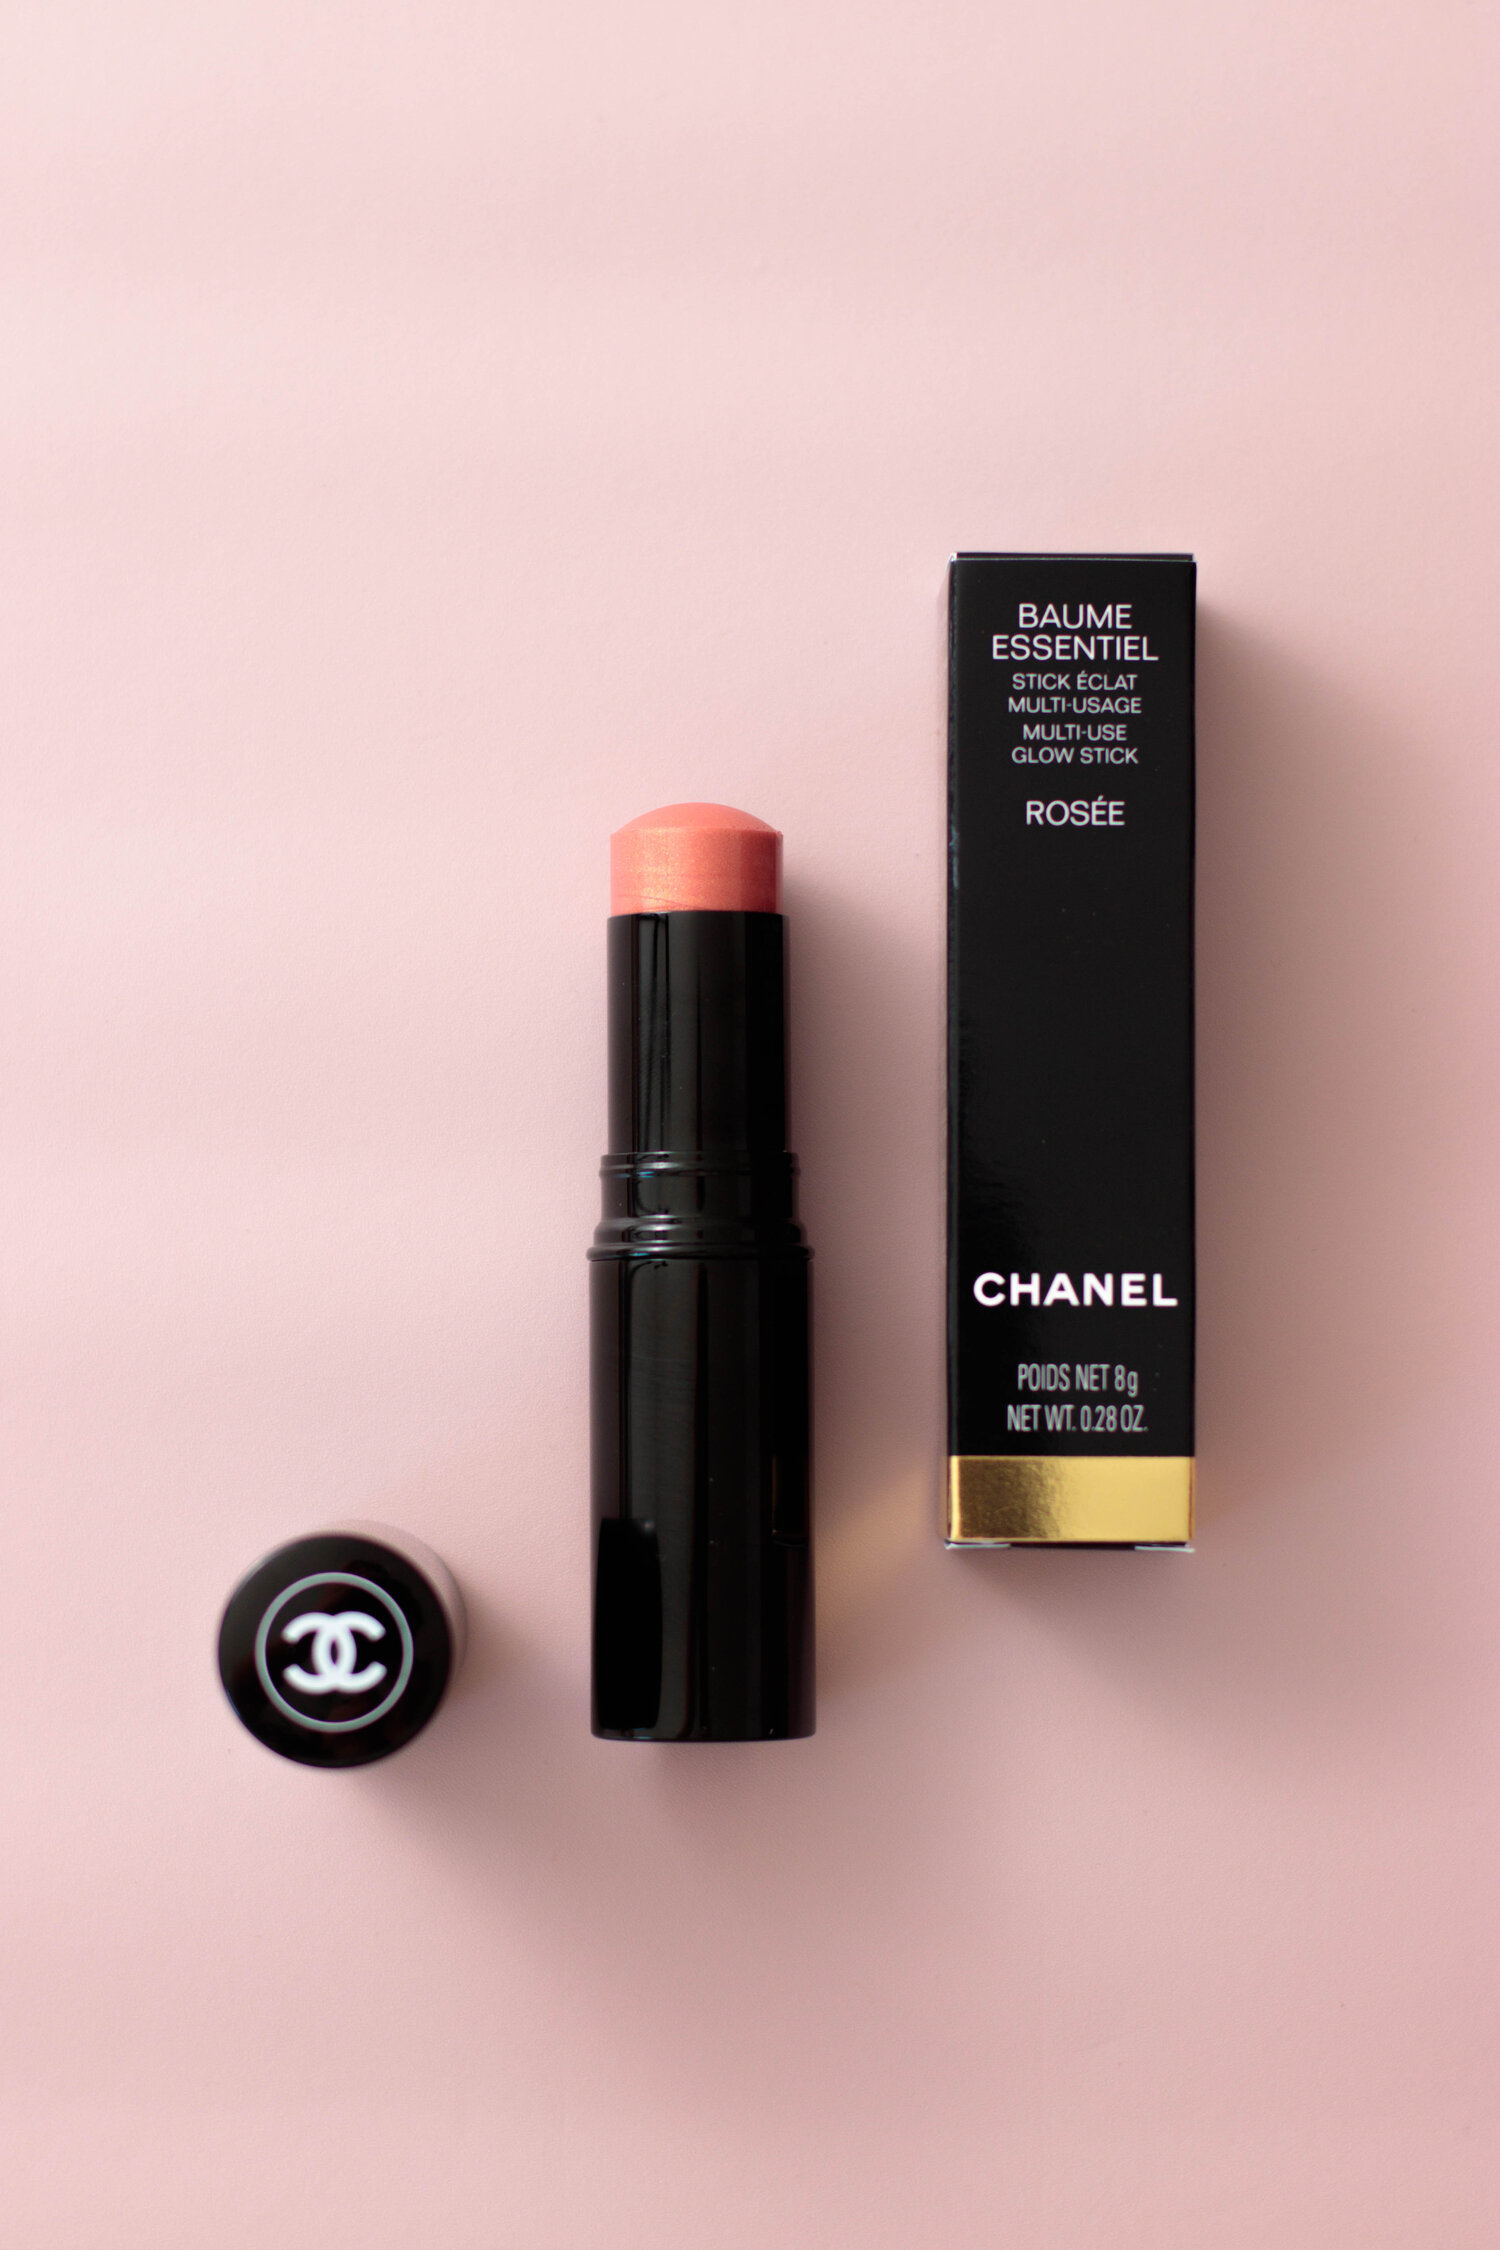 Multi-Use Glow Stick from chanel ✨